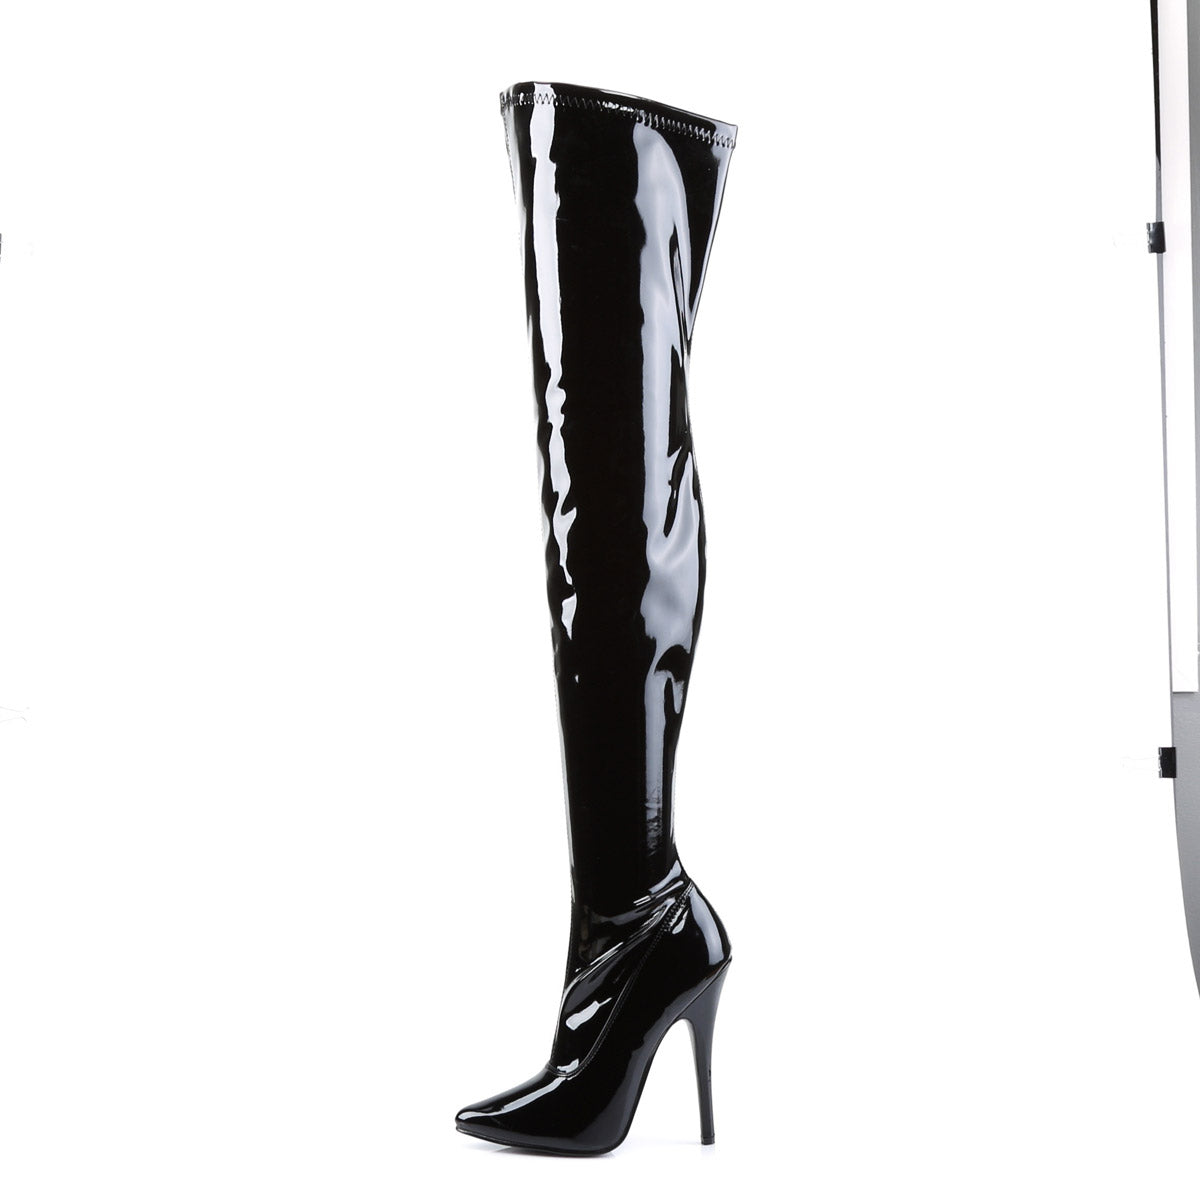 Sexy Zipper Side Stretch Thigh High Stiletto Heel Boots Shoes Pleaser Devious DOMINA/3000